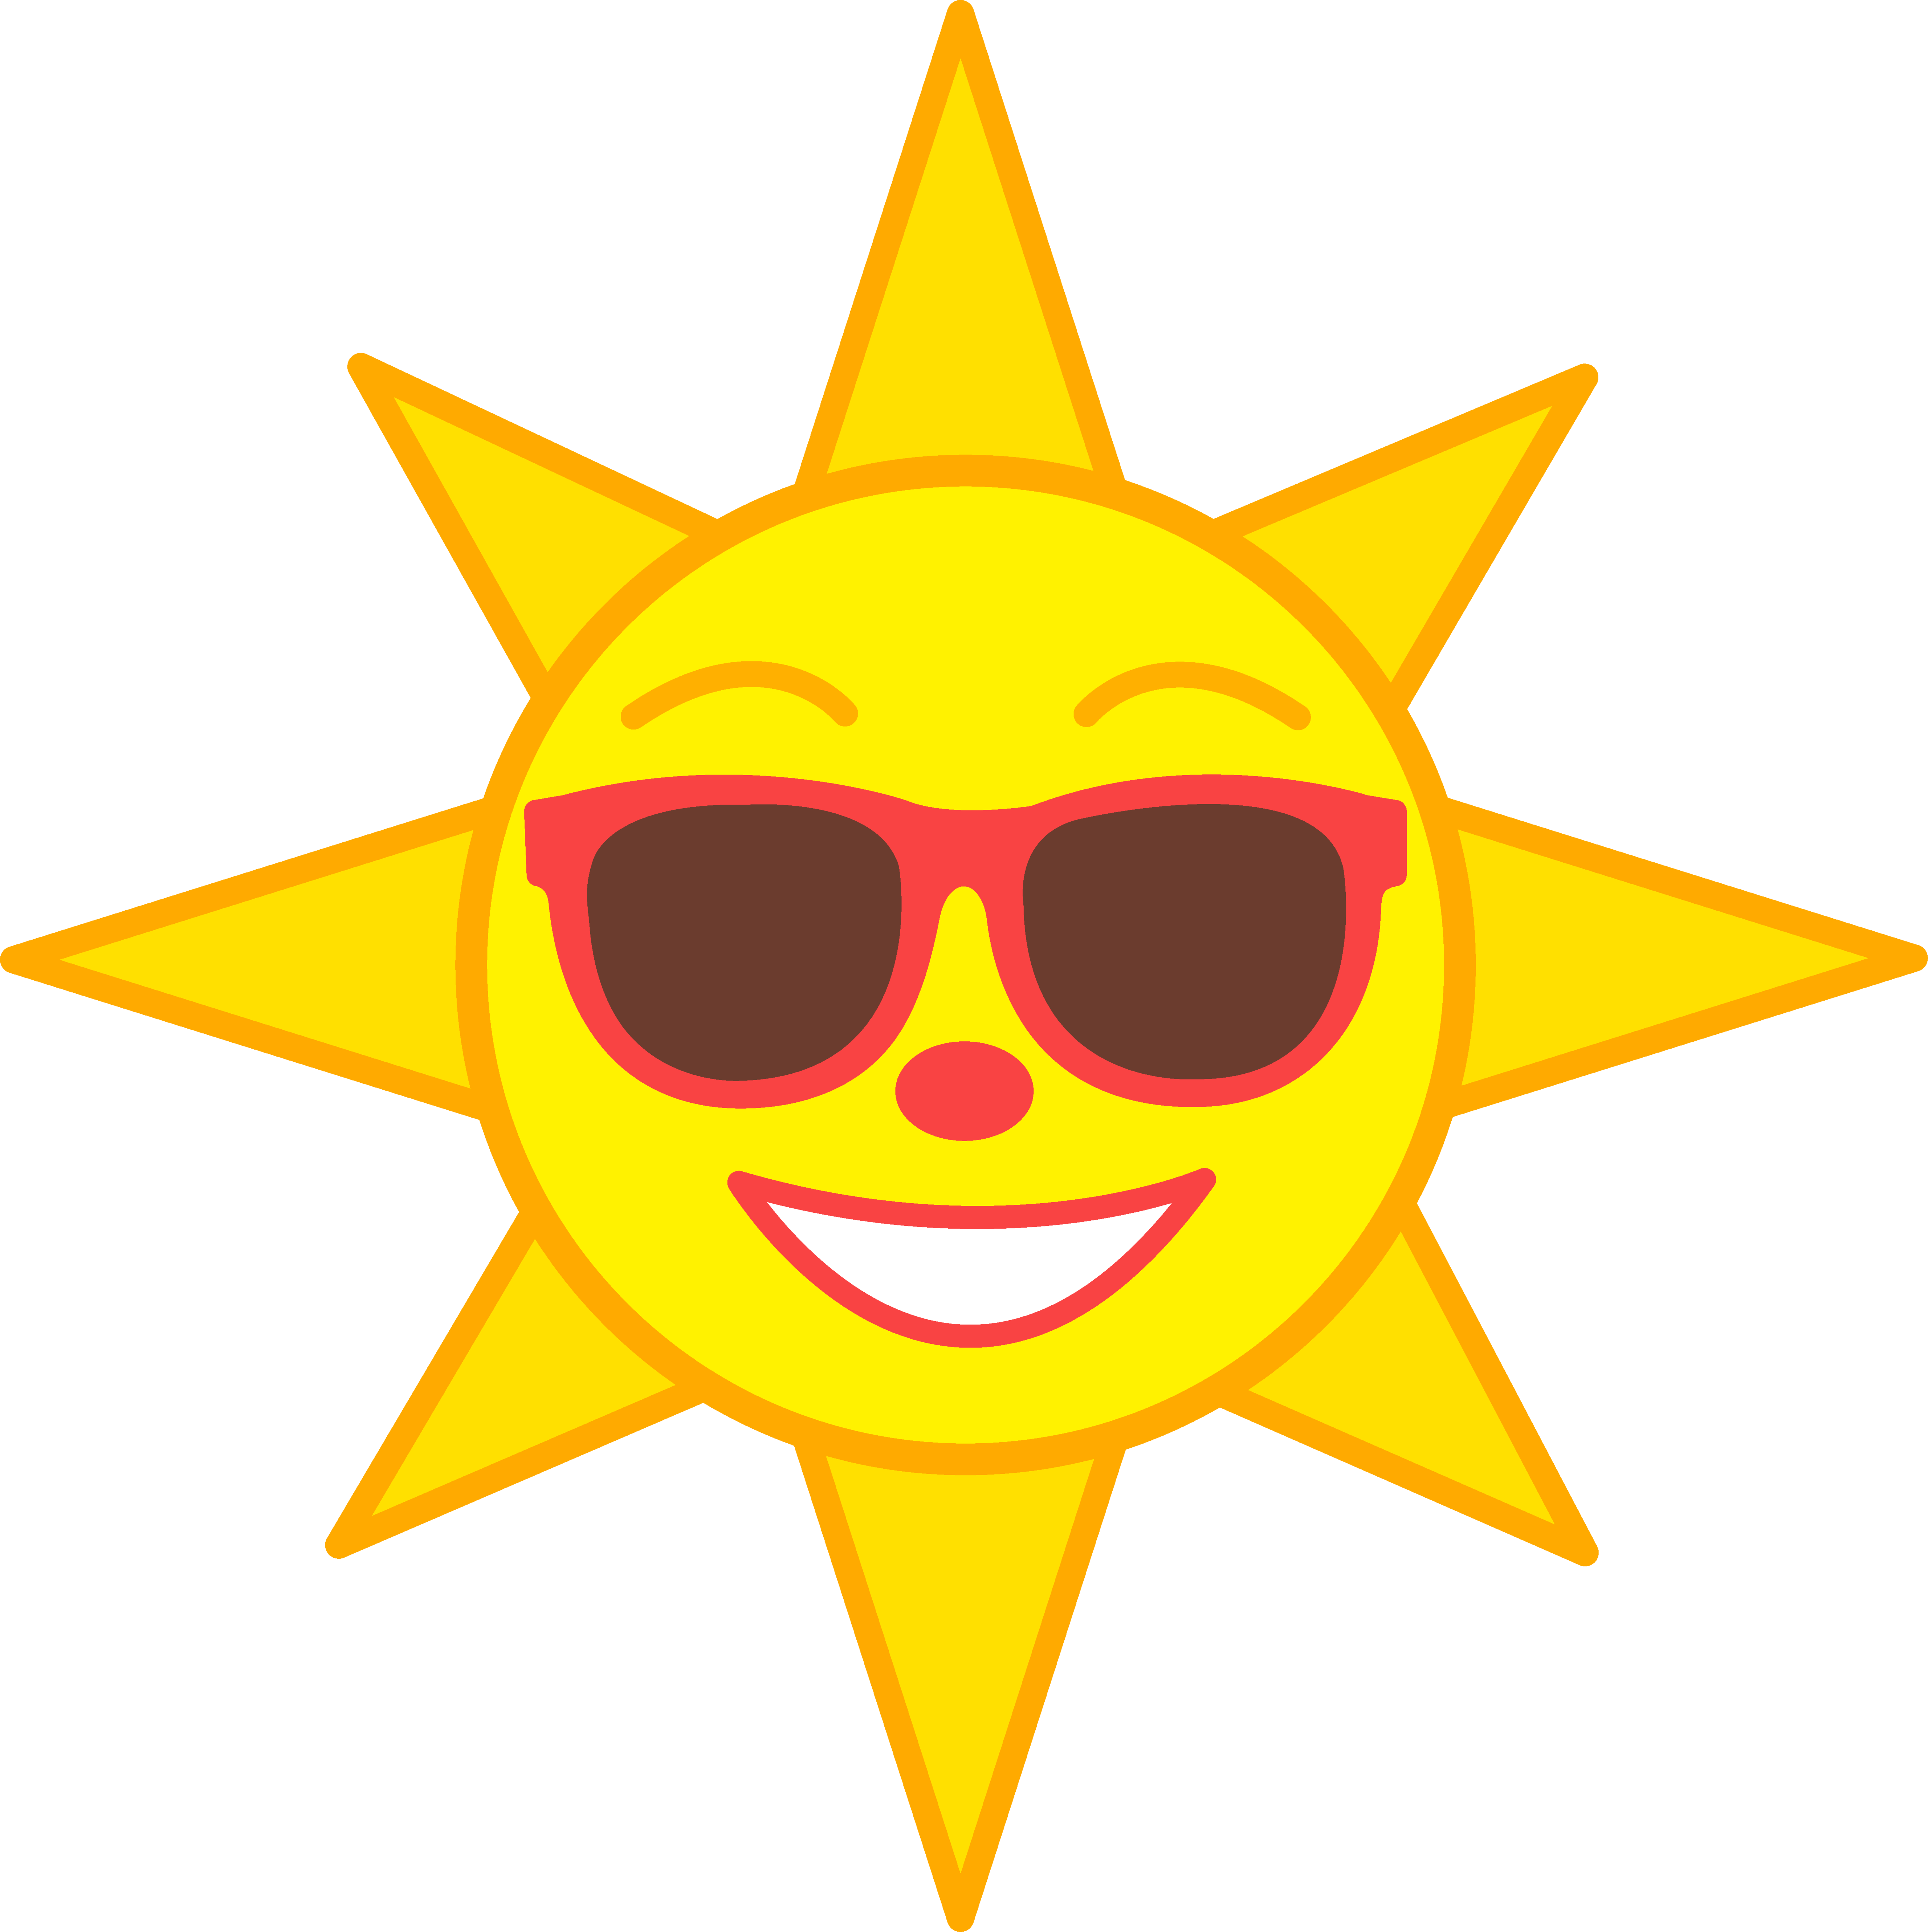 Sun Images Art Clipart - Free to use Clip Art Resource